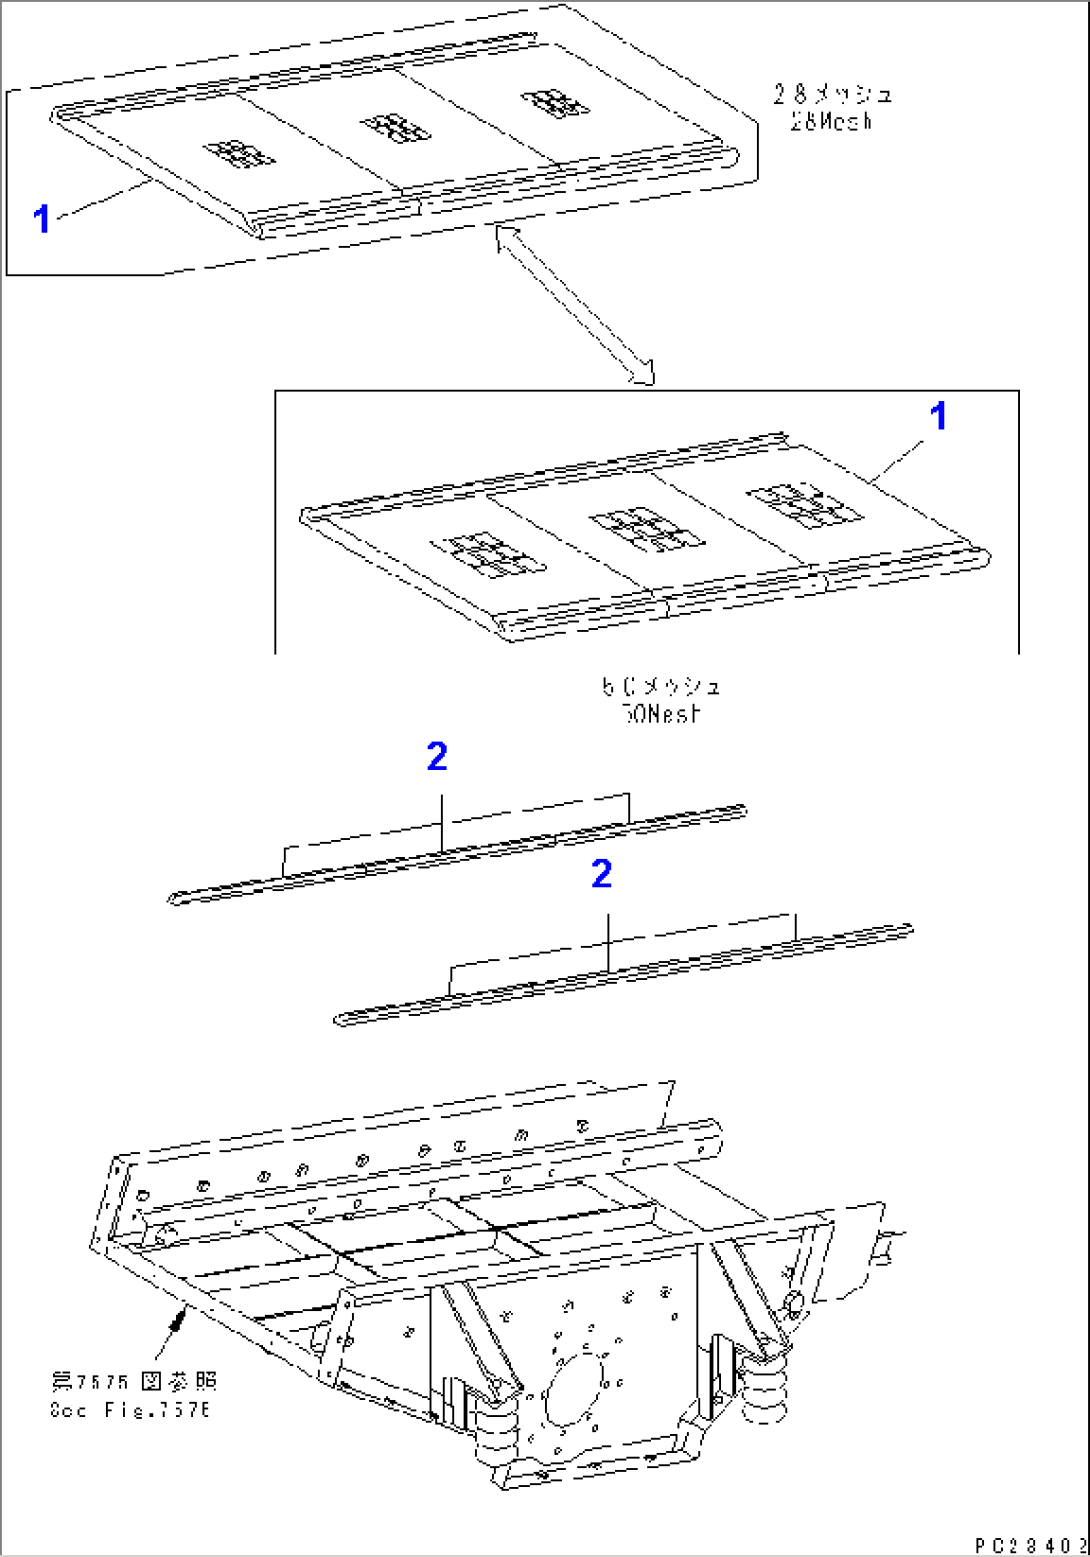 SCREEN SYSTEM (4/4) (SCREEN) (DIRECT DRIVE TYPE)(#1101-)